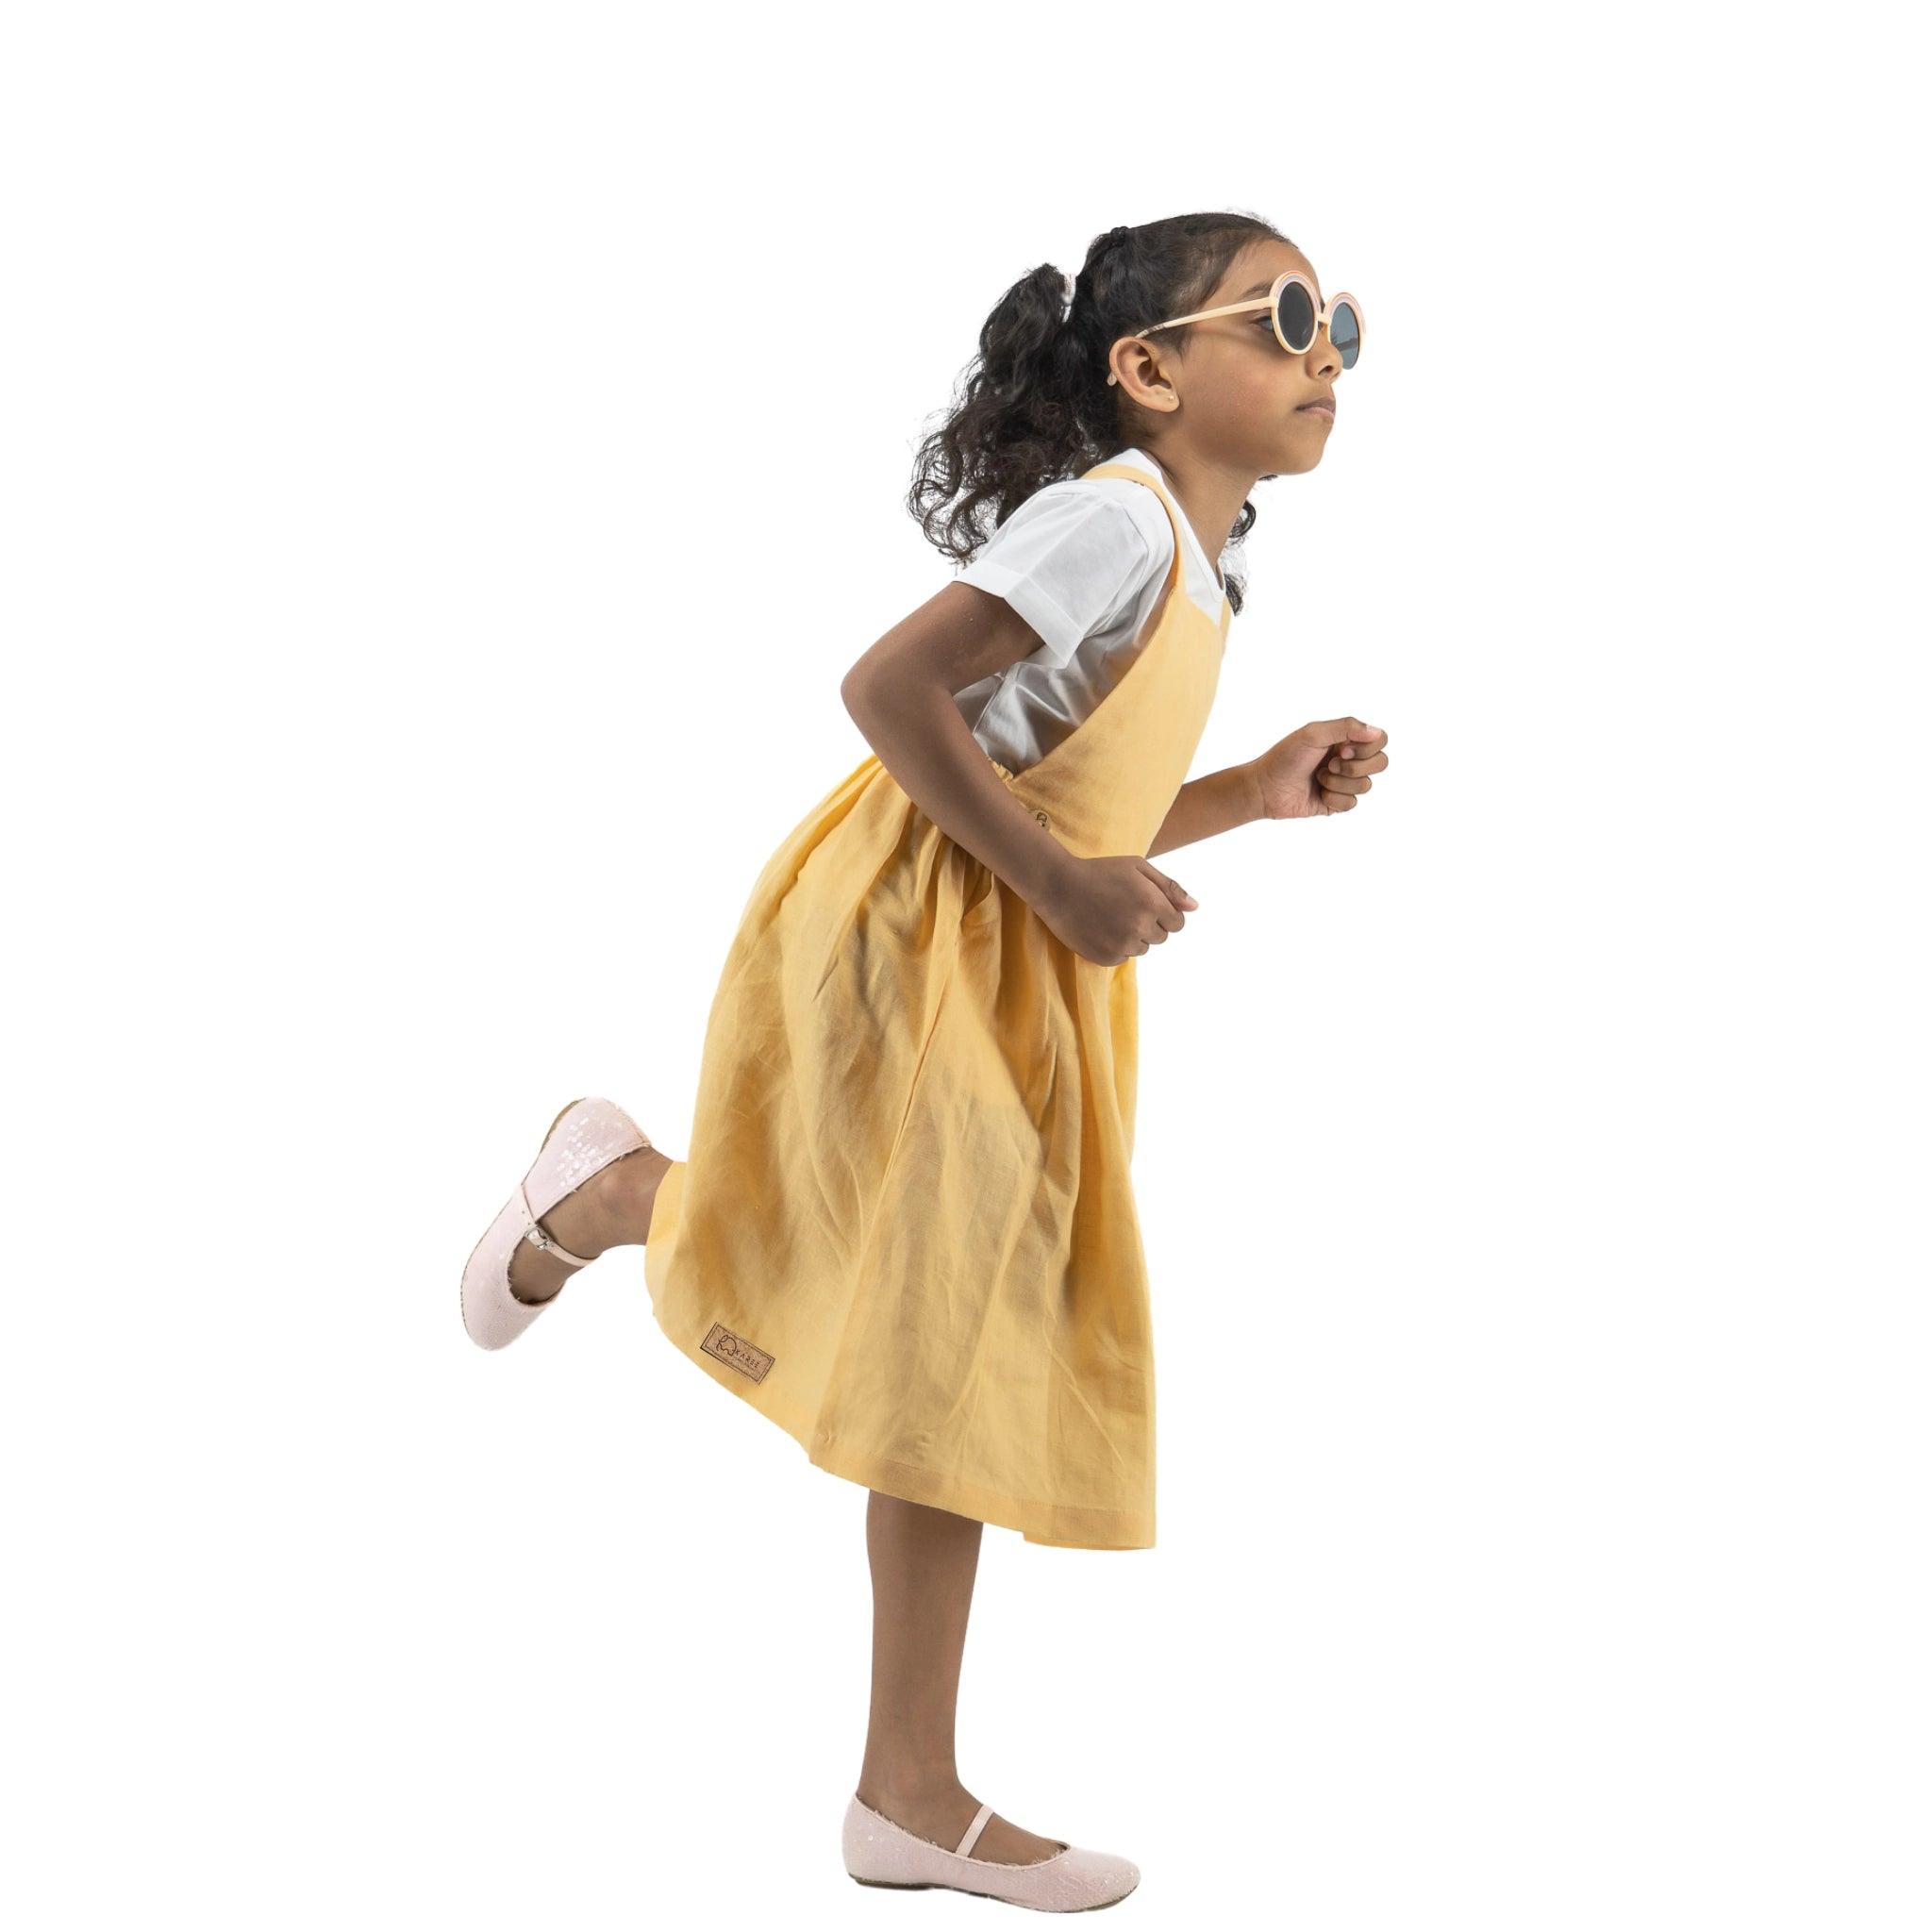 A young girl in a Karee Golden Fleece Linen Pinafore and white sunglasses playfully running, isolated on a white background.